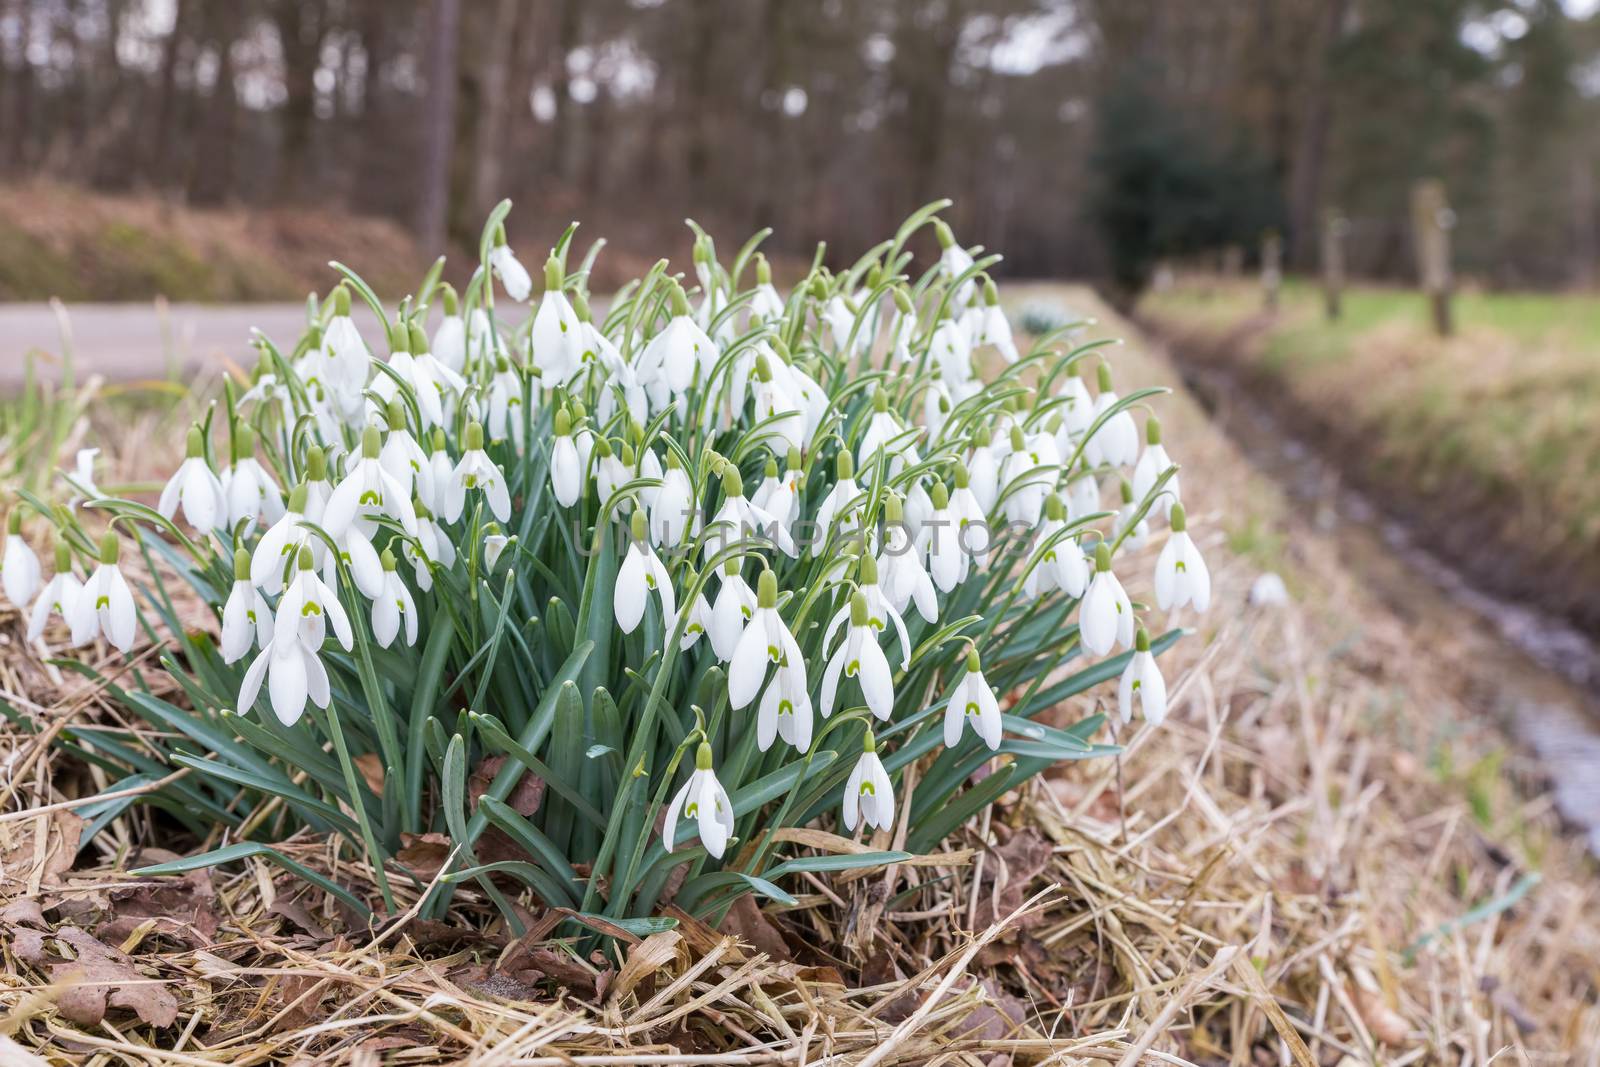 Group snowdrops near ditch in rural landscape by BenSchonewille